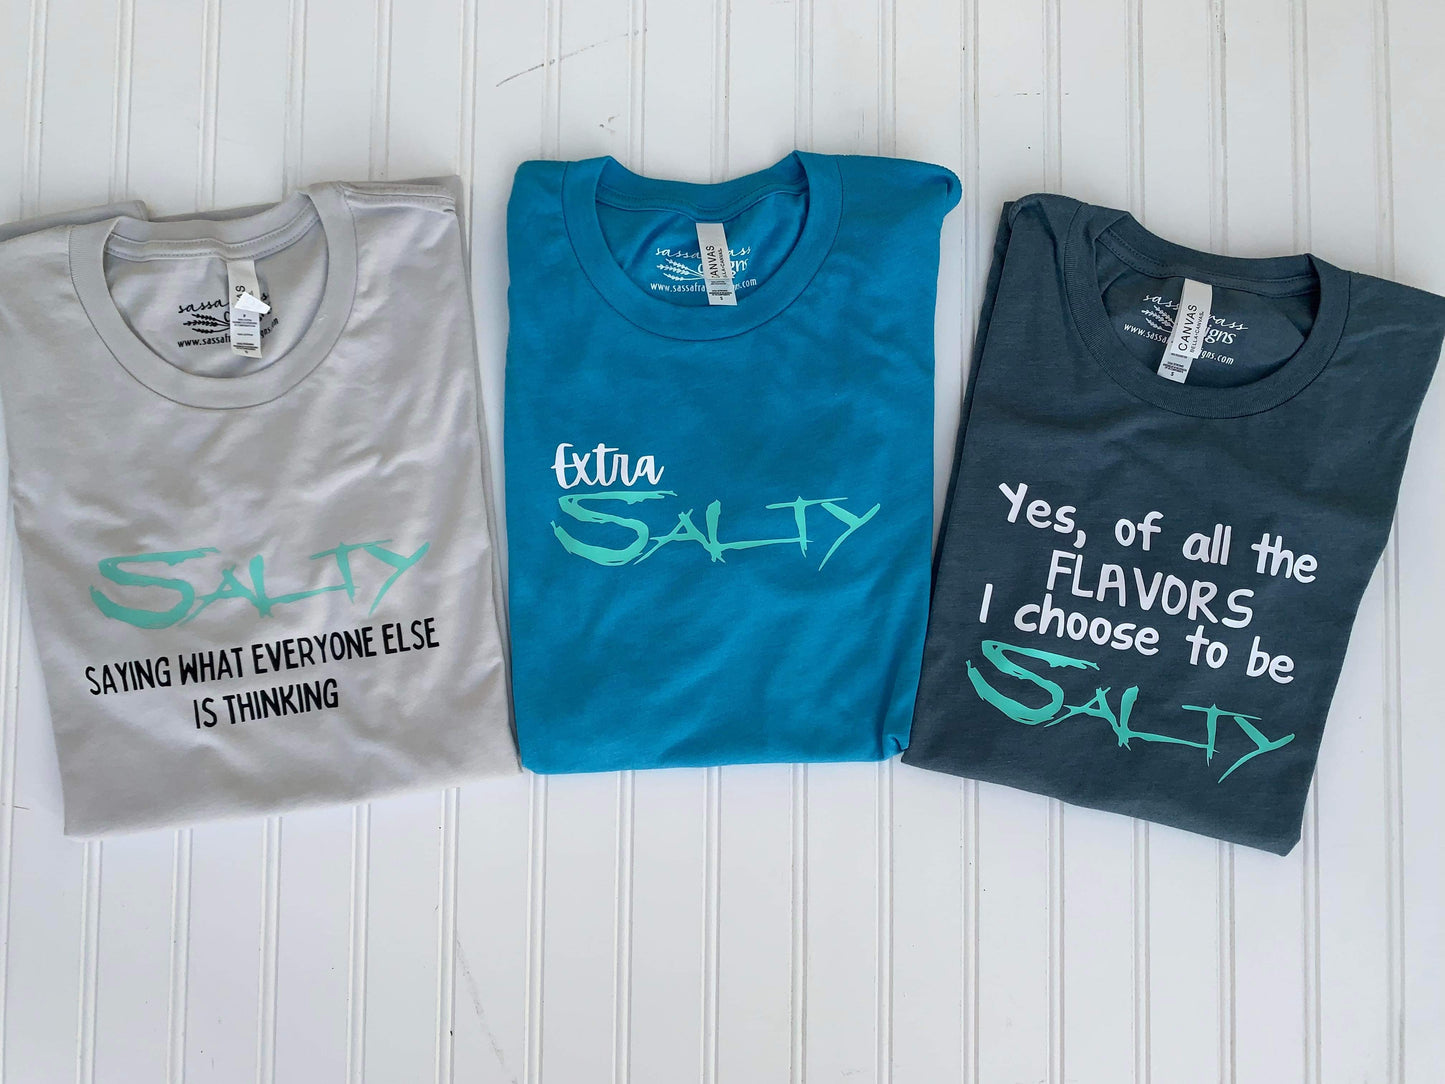 Salty Tee's - The Salty Mare